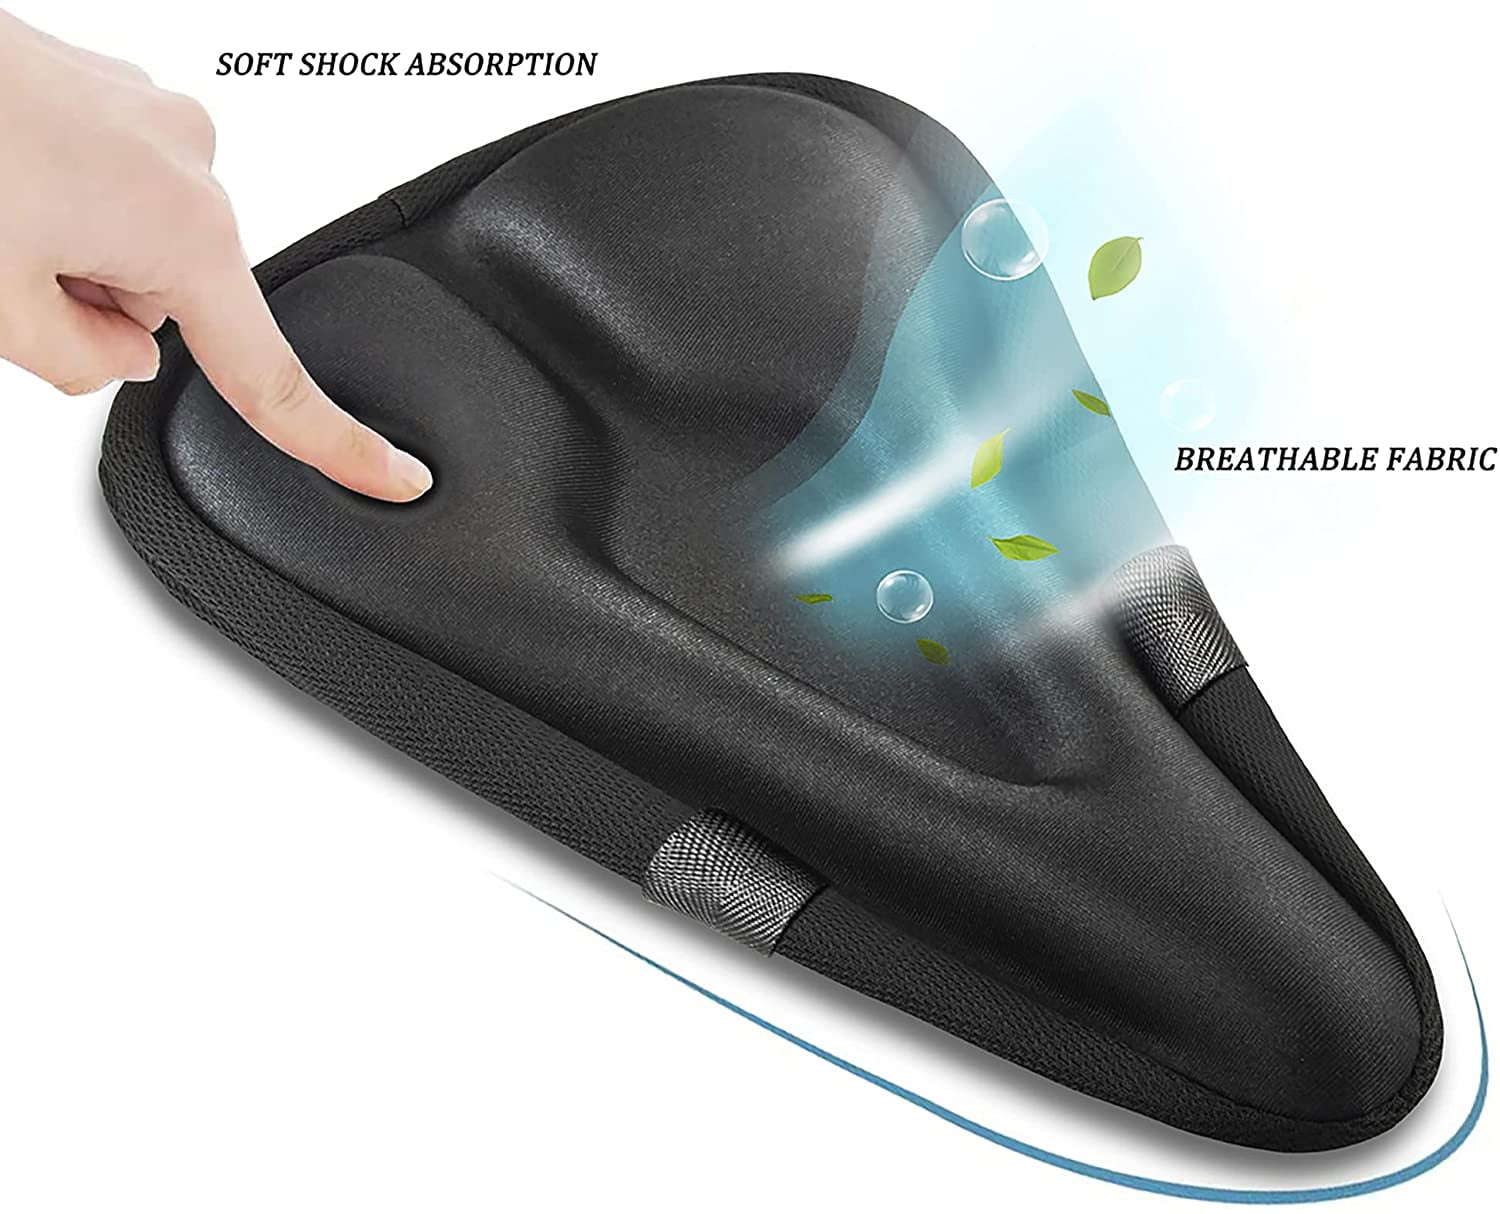 Extra Soft Wide Gel Bike Seats Cover for Men Women Comfort Fits Bicycle Cushions of Exercise Bikes Spin Stationary Cruiser Bicycles Indoor Cycling ANZOME Bike Seat Cushion Waterproof Case Included 